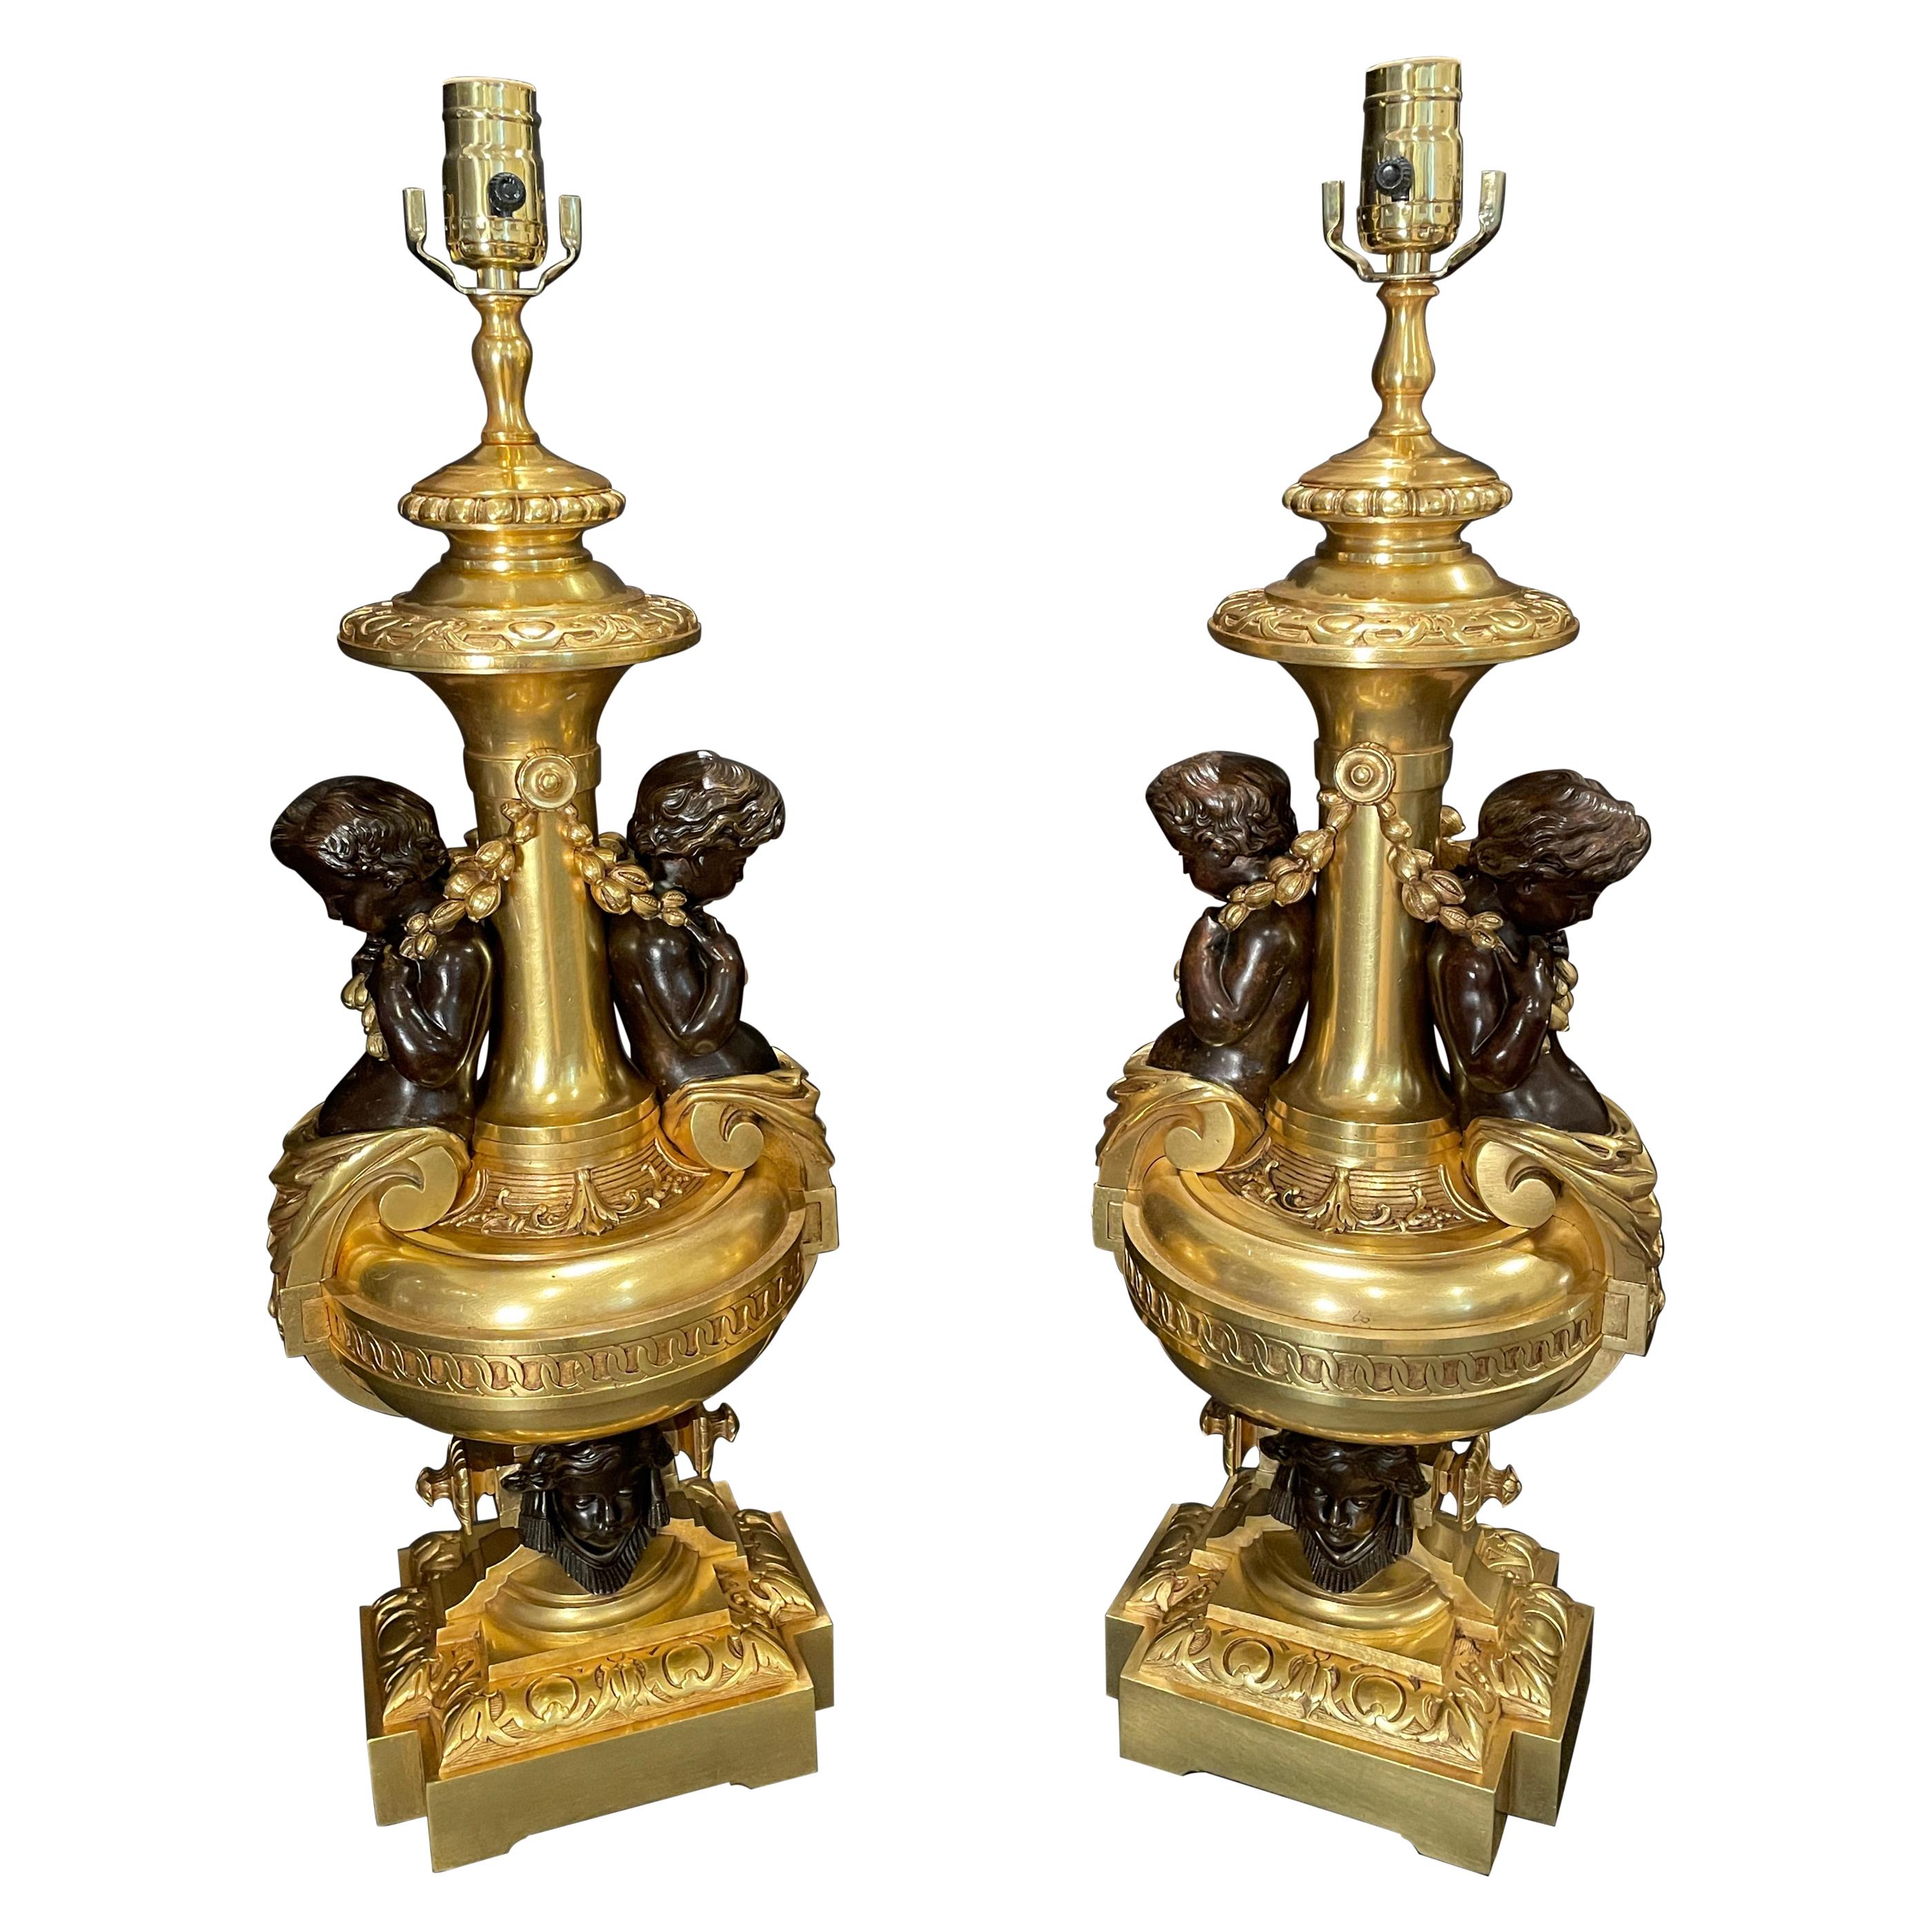 Pair of Gilt and Patinated Putti Lamps